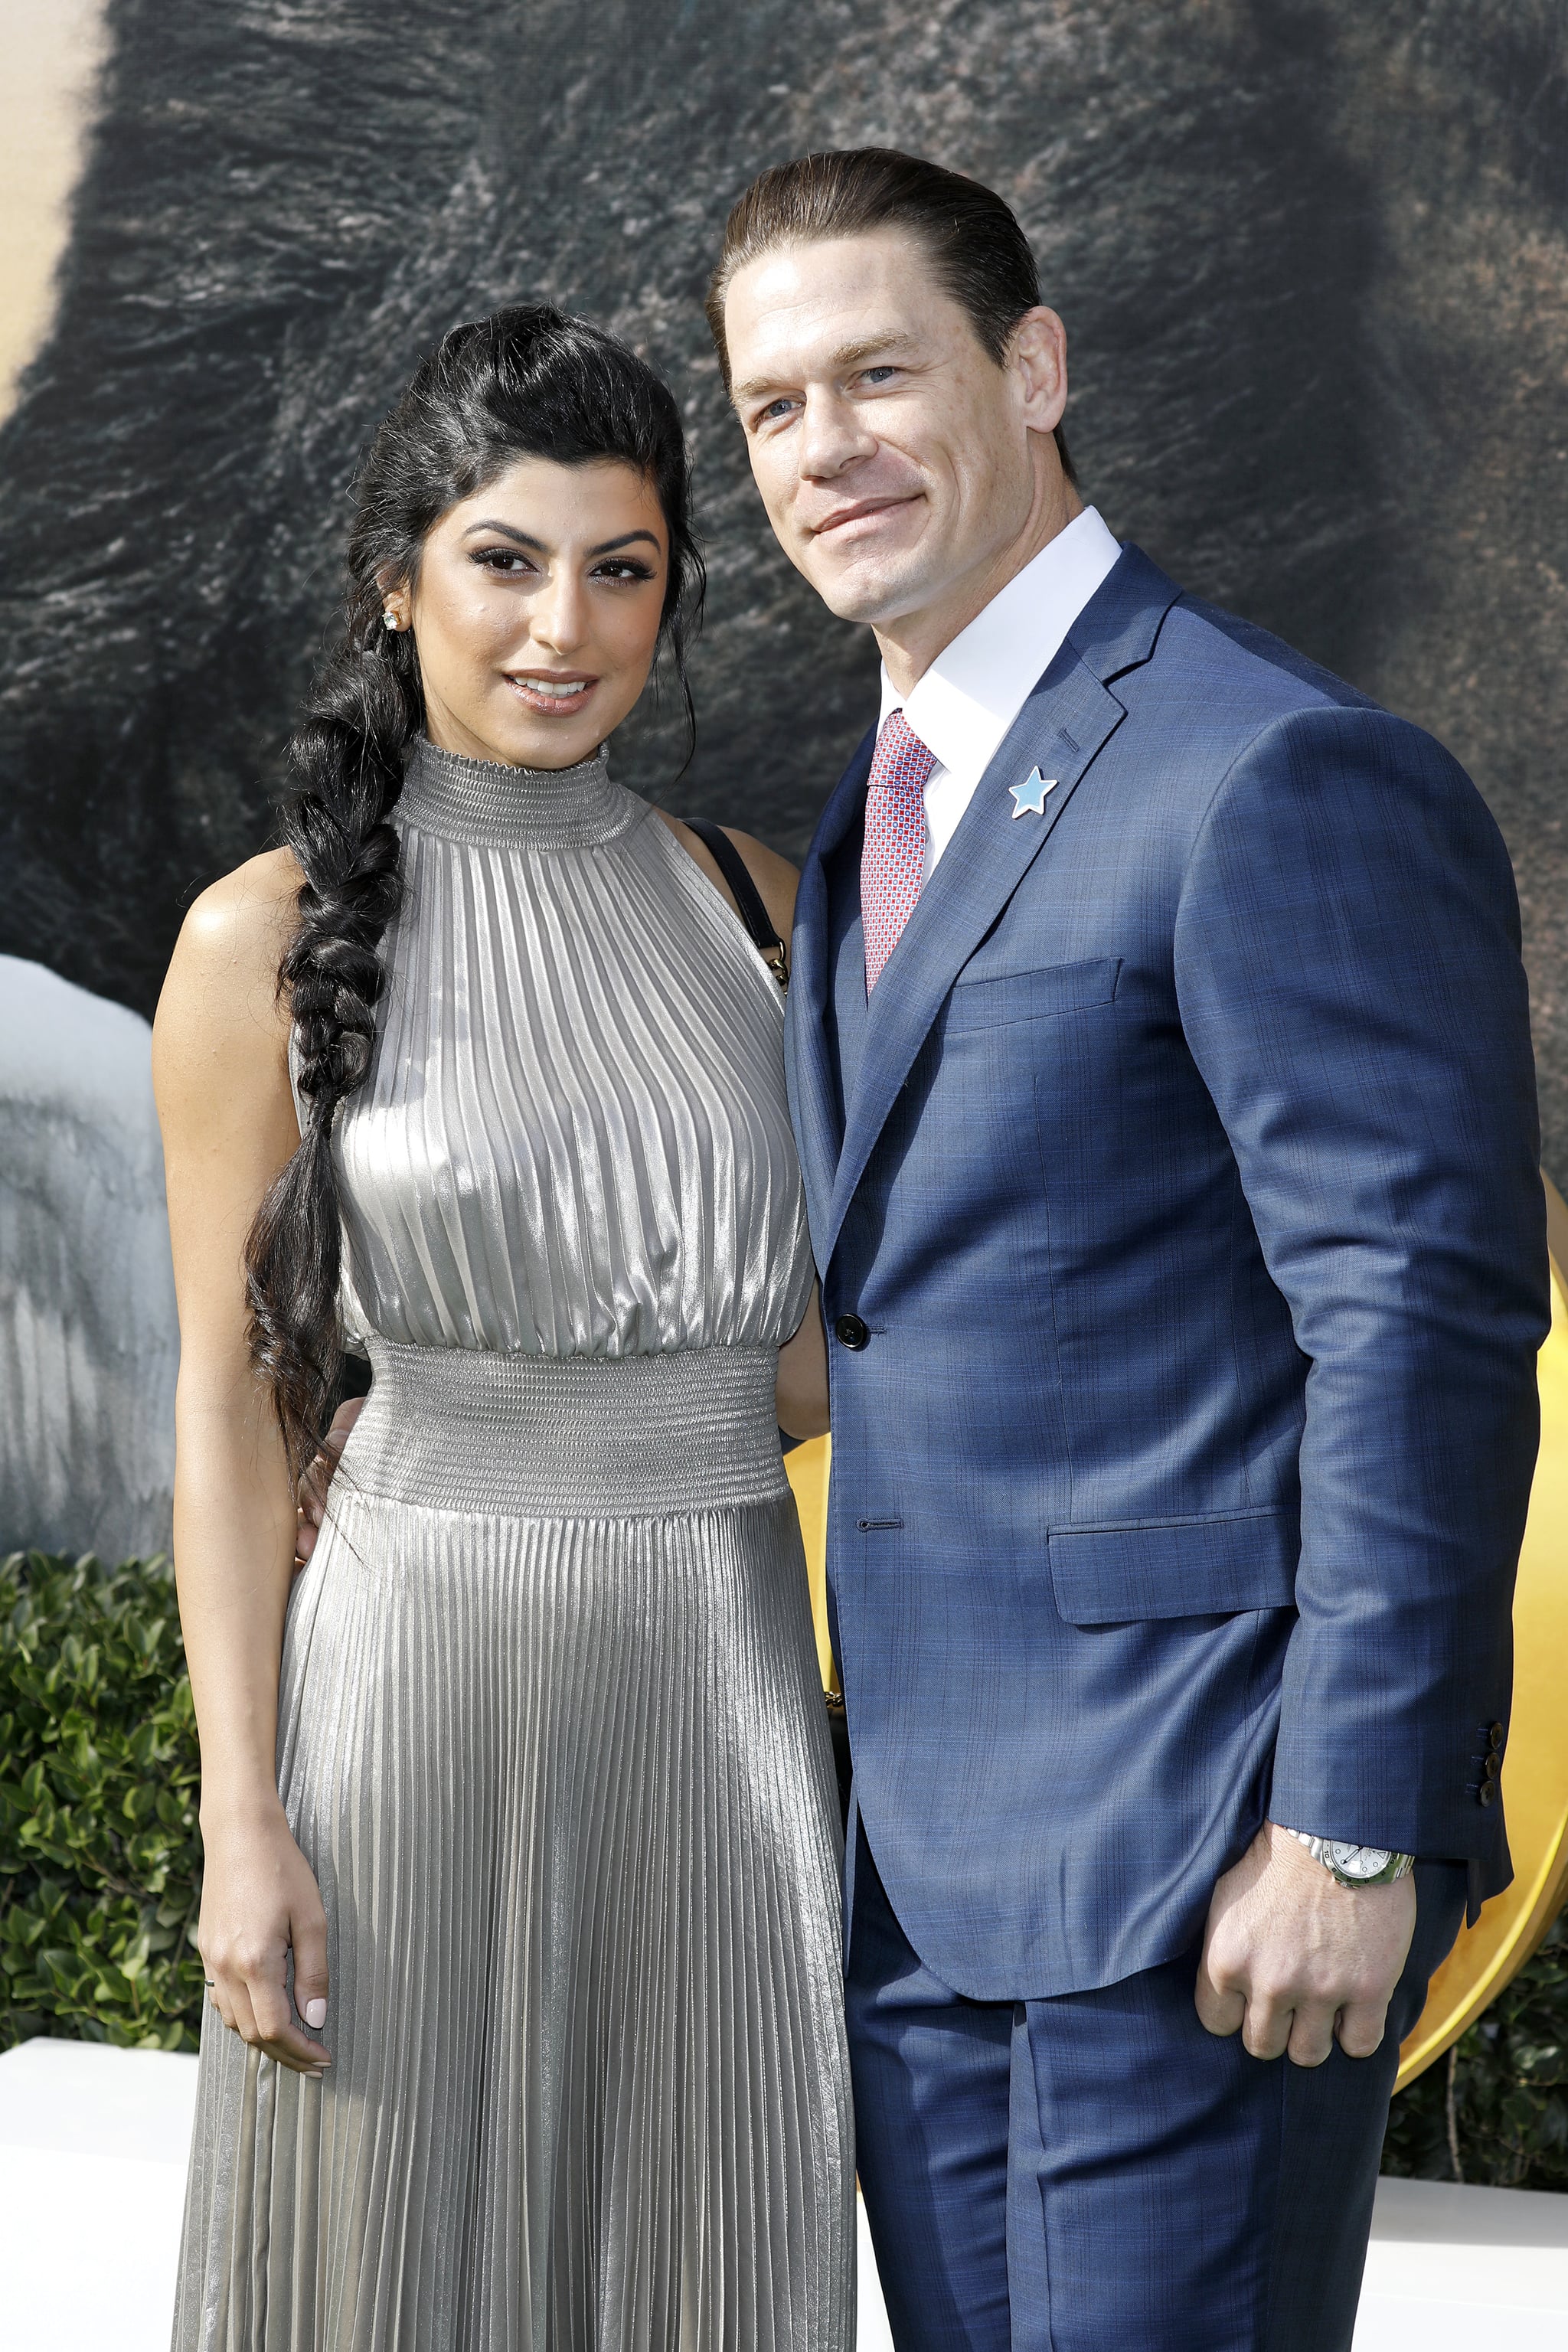 CALIFORNIA, UNITED STATES - JANUARY 11 2020: Shay Shariatzadeh and John Cena photographed at the Premiere 'Dolittle' at Regency Village Theatre on January 11, 2020 in Westwood, California.- PHOTOGRAPH BY P. Lehman / Future Publishing (Photo credit should read P. Lehman/Future Publishing via Getty Images)